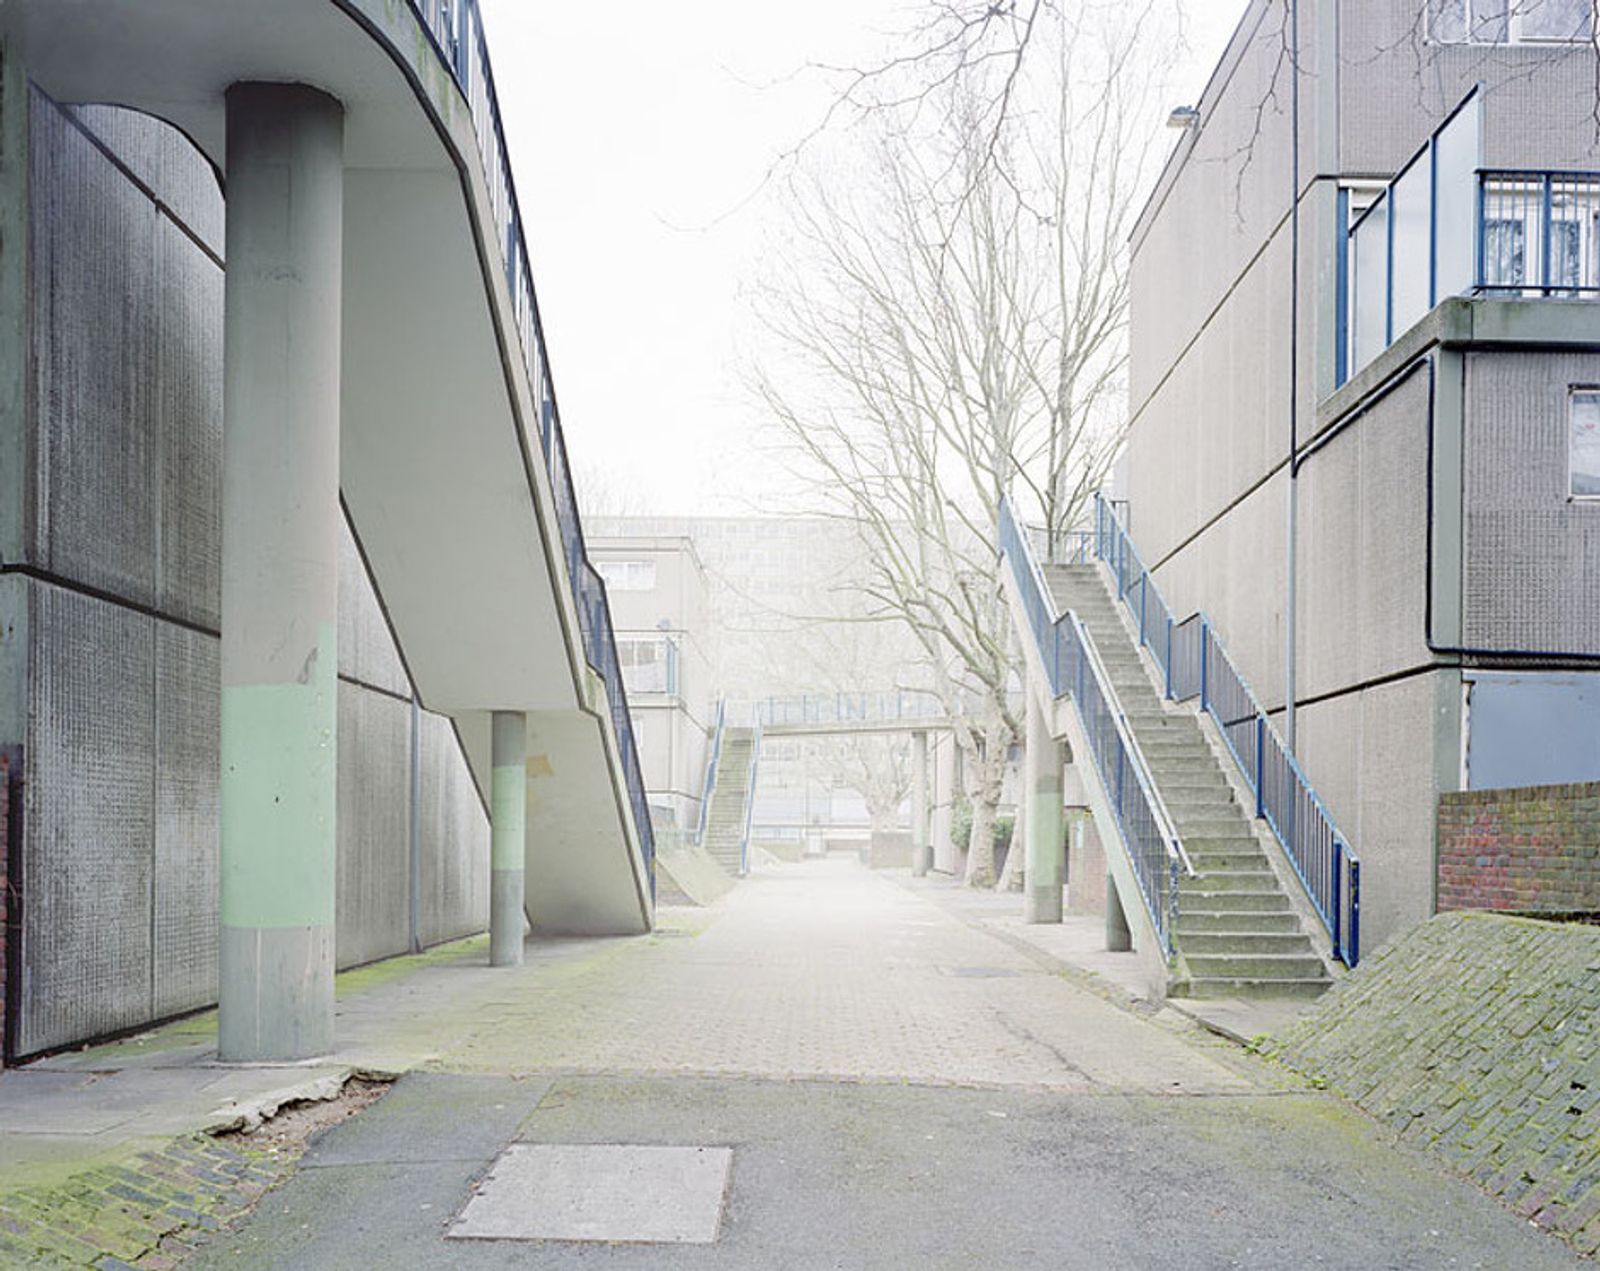 © Simon Kennedy - Image from the Heygate Abstracted photography project